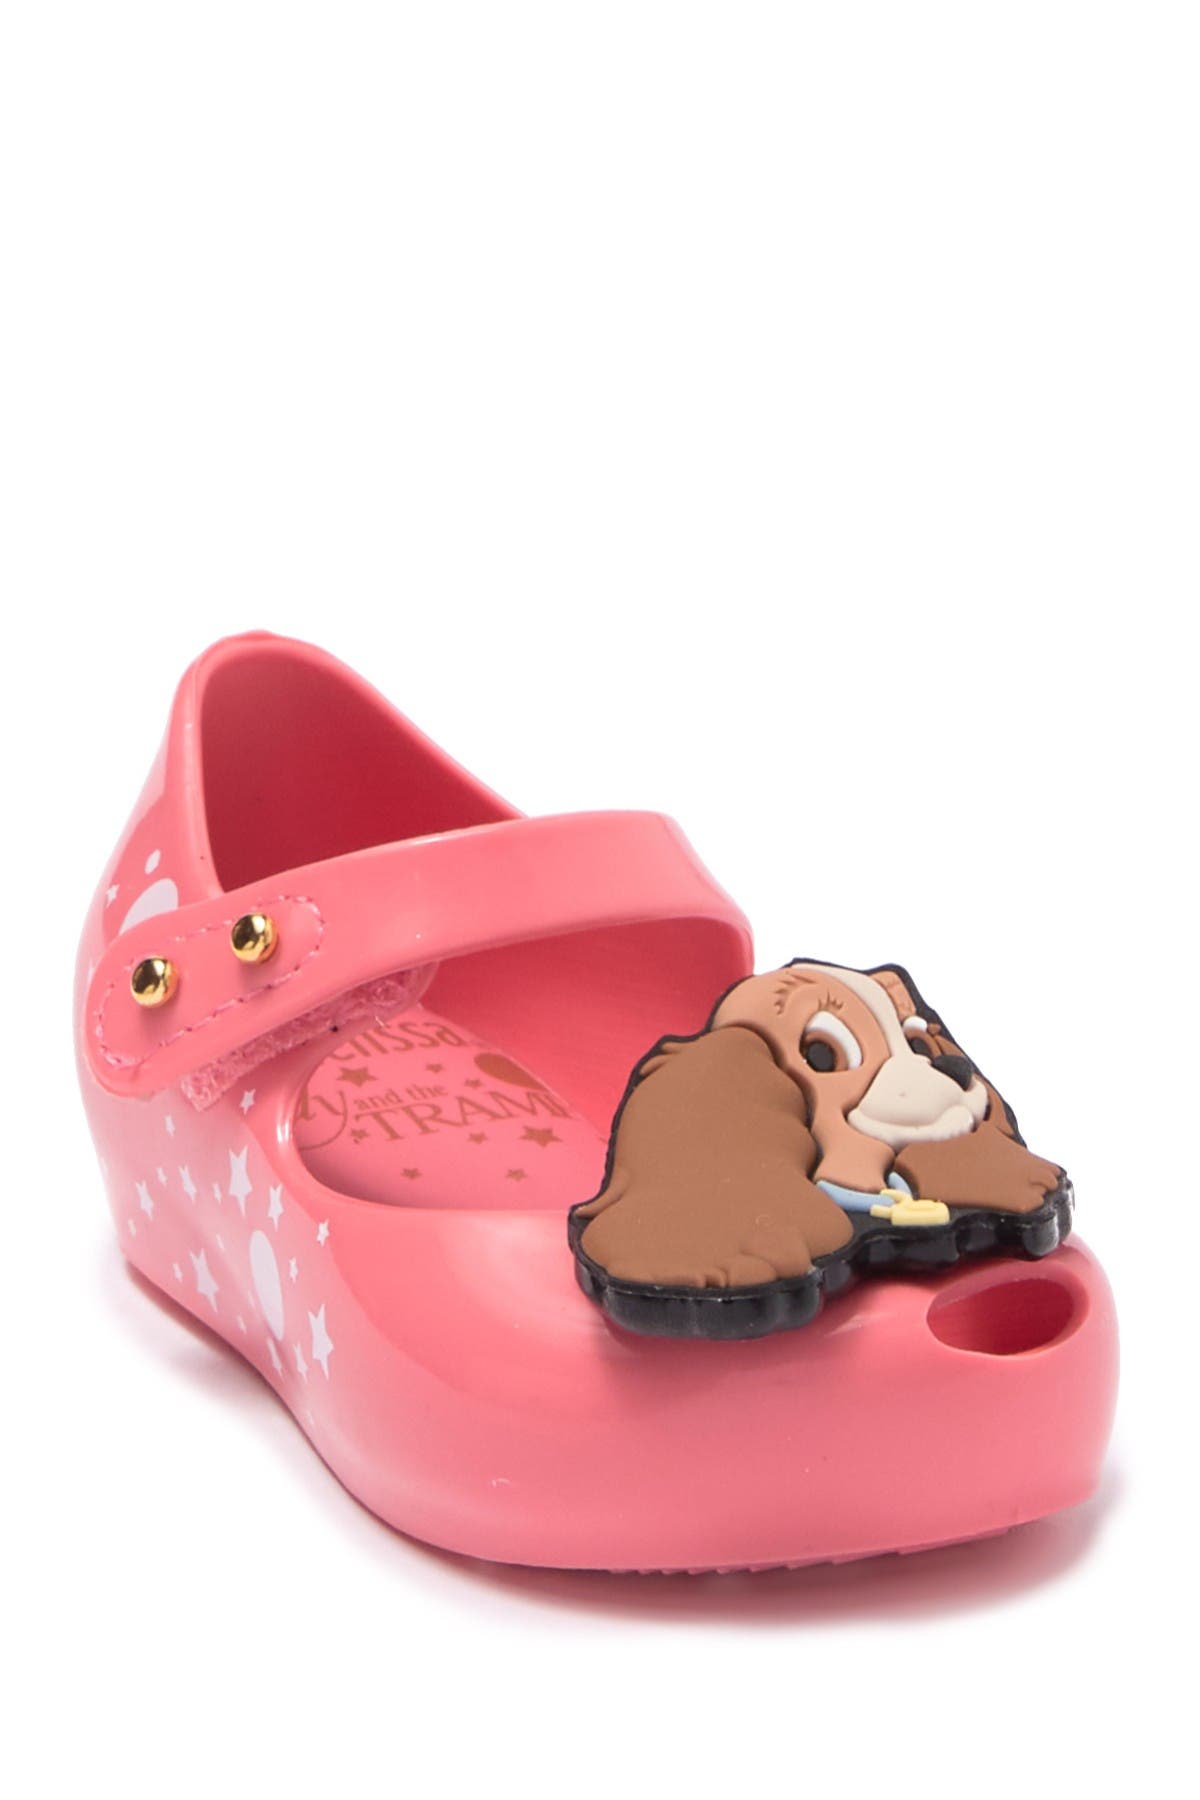 lady and the tramp slippers